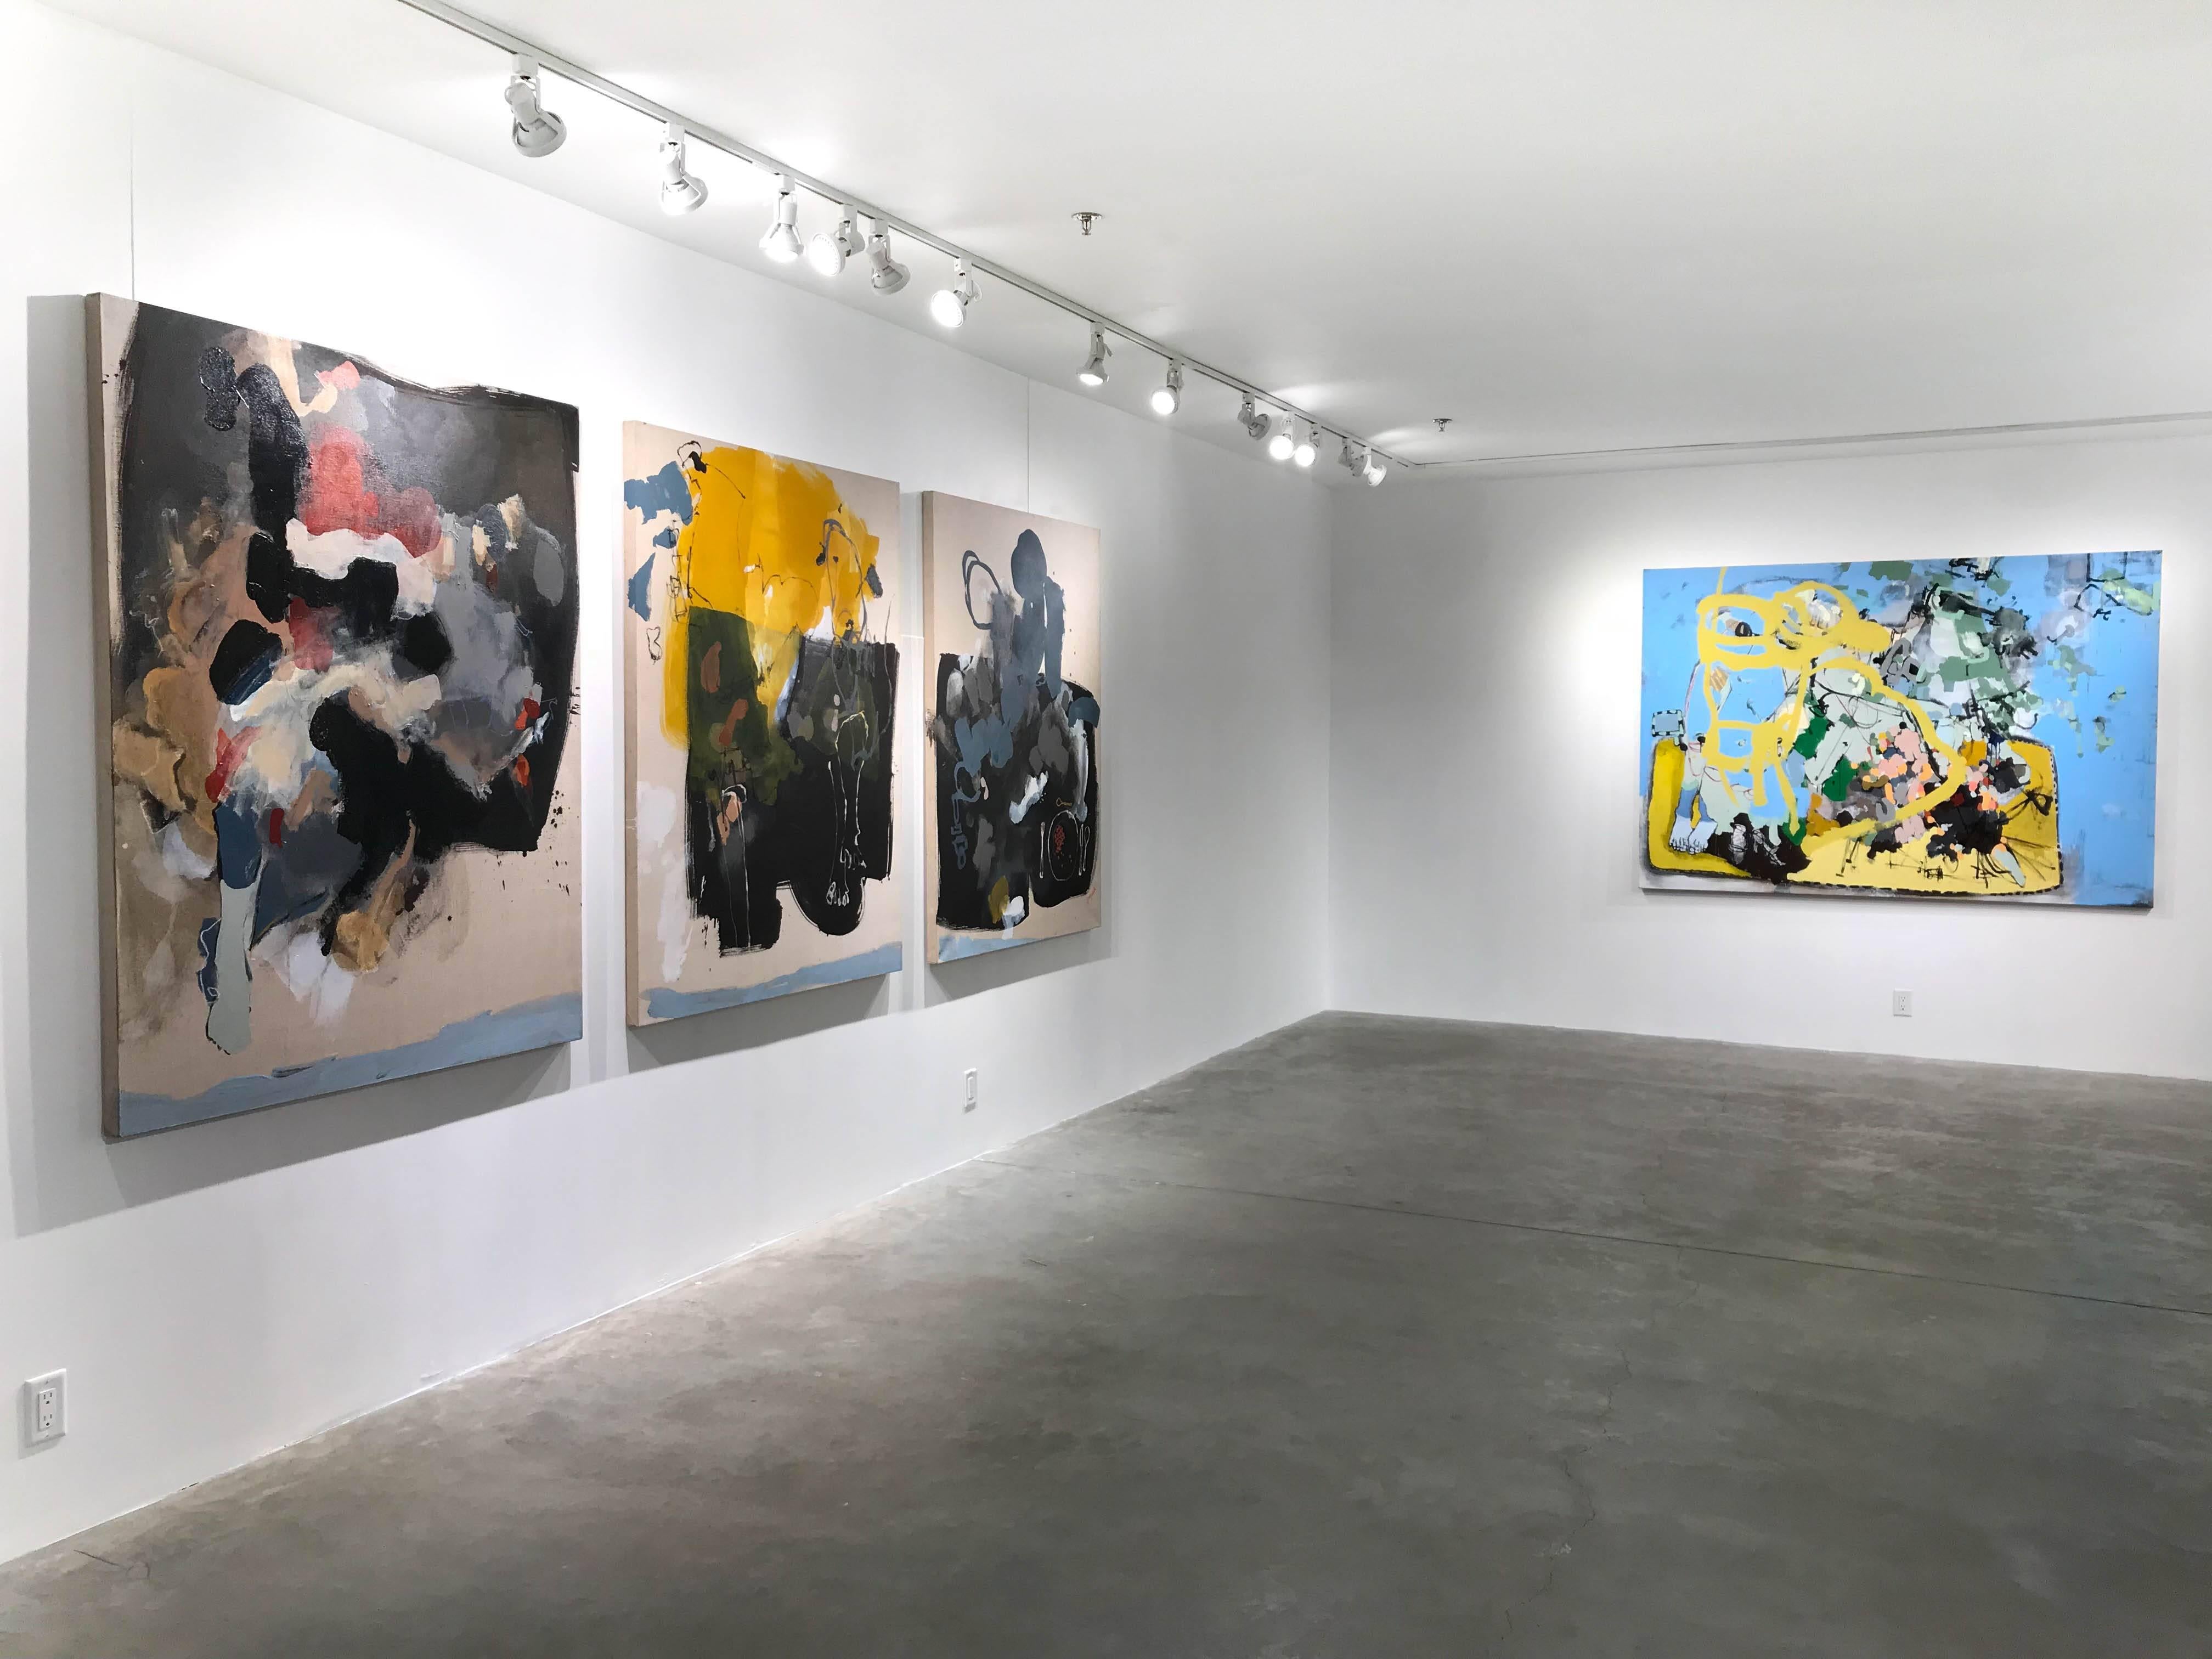 This triptych artwork is a mixed-media artwork by Anna Schuleit Haber. The work is made up of ink and acrylic paint on Belgian linen.

As described by art critic Cate McQuaid of The Boston Globe in 2018, 